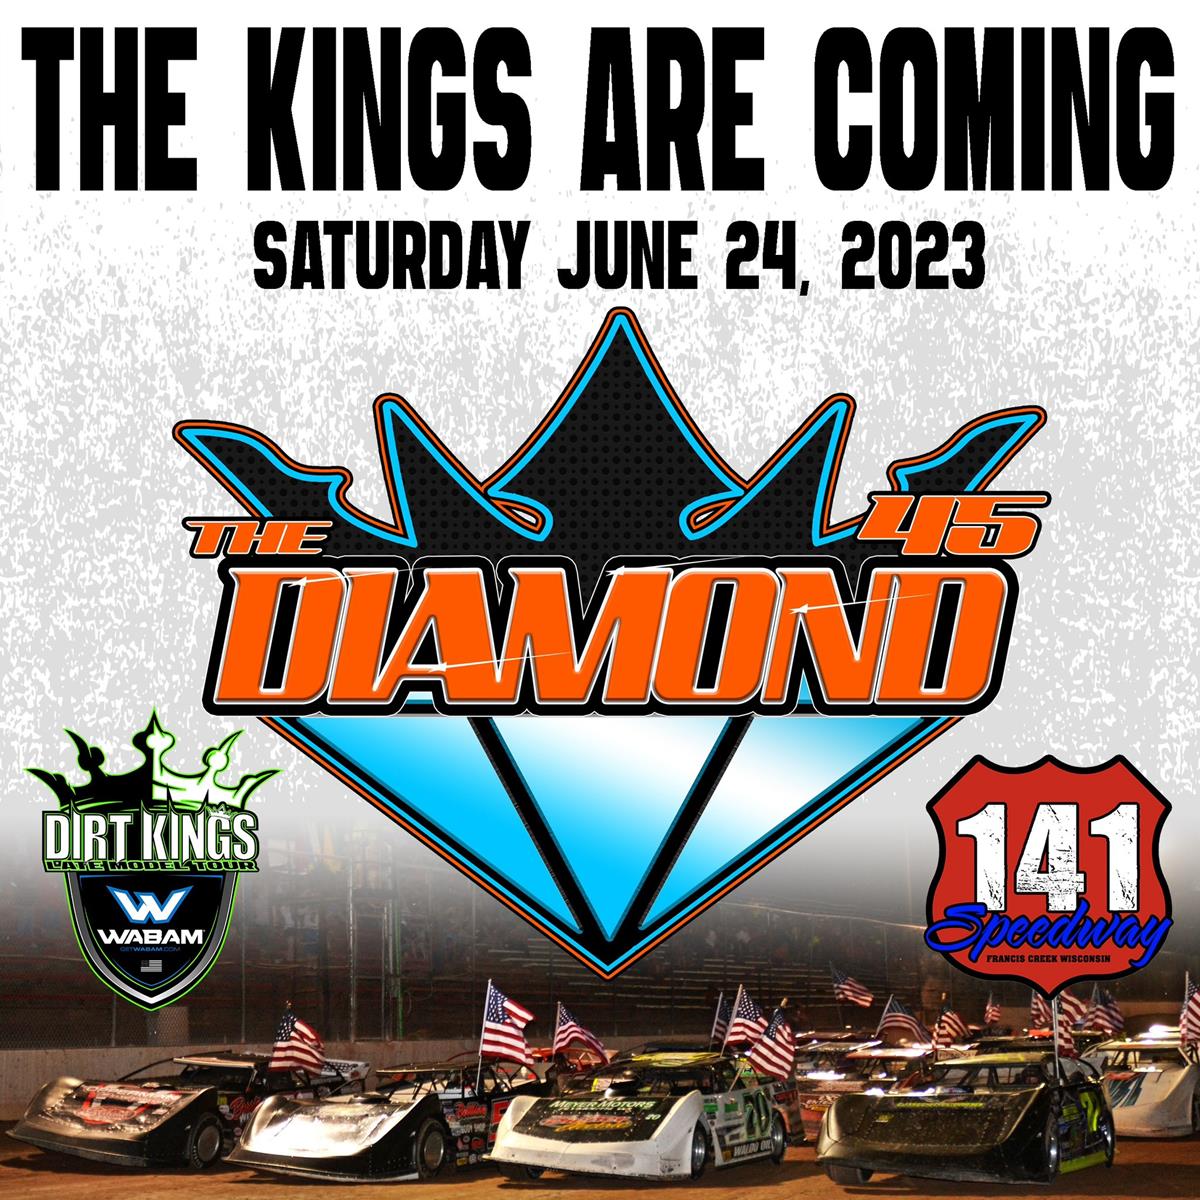 Dirt King Late Models return to the 141 Speedway